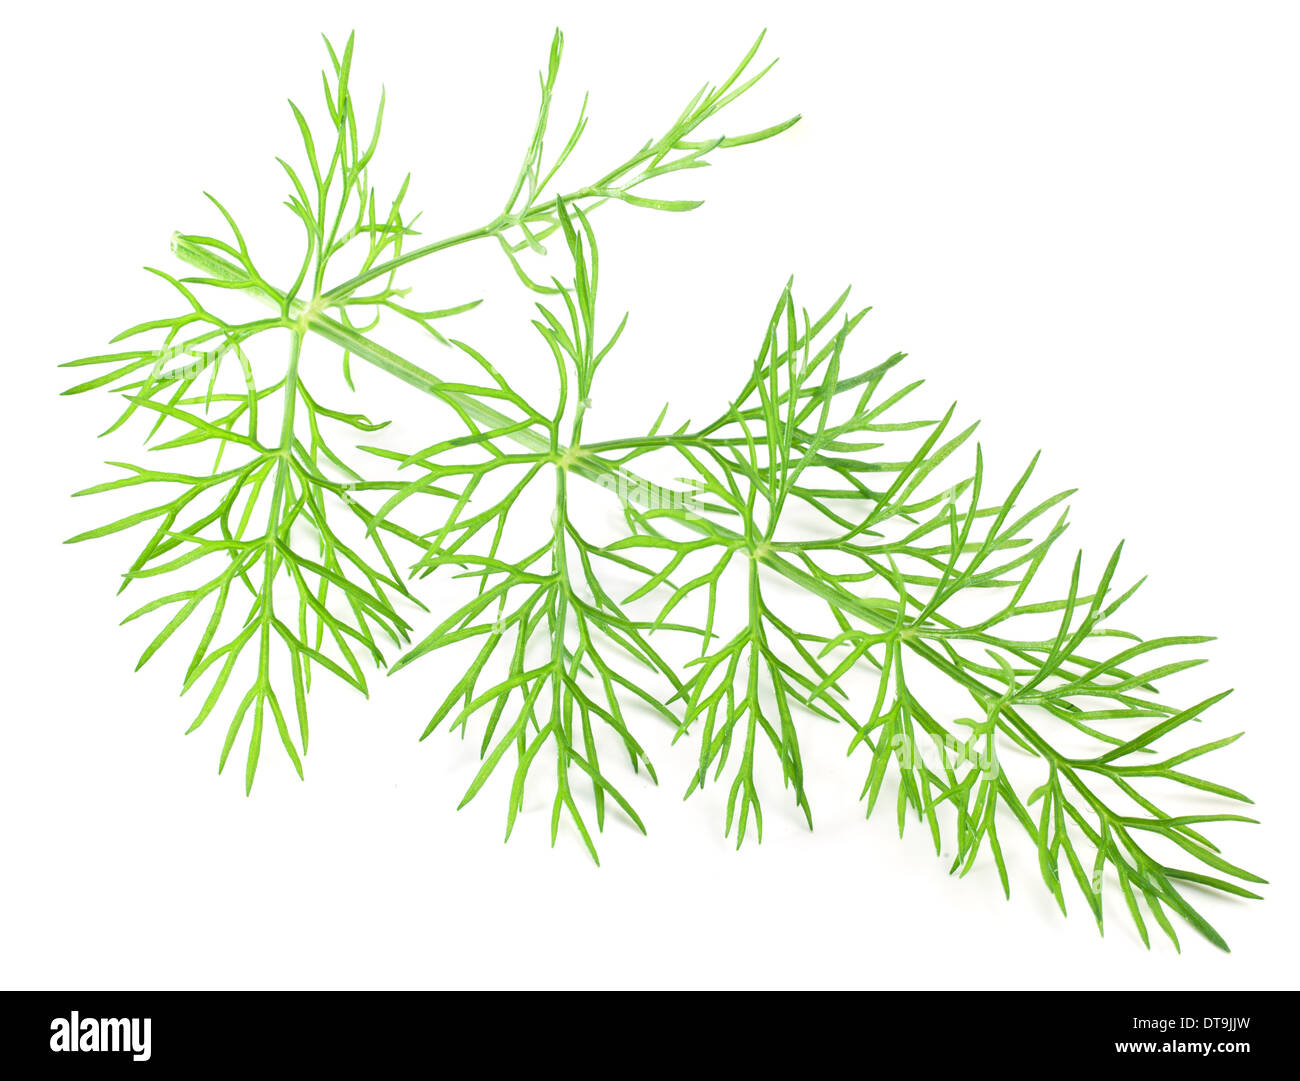 Green dill isolated on a white background. Macro shot. Stock Photo